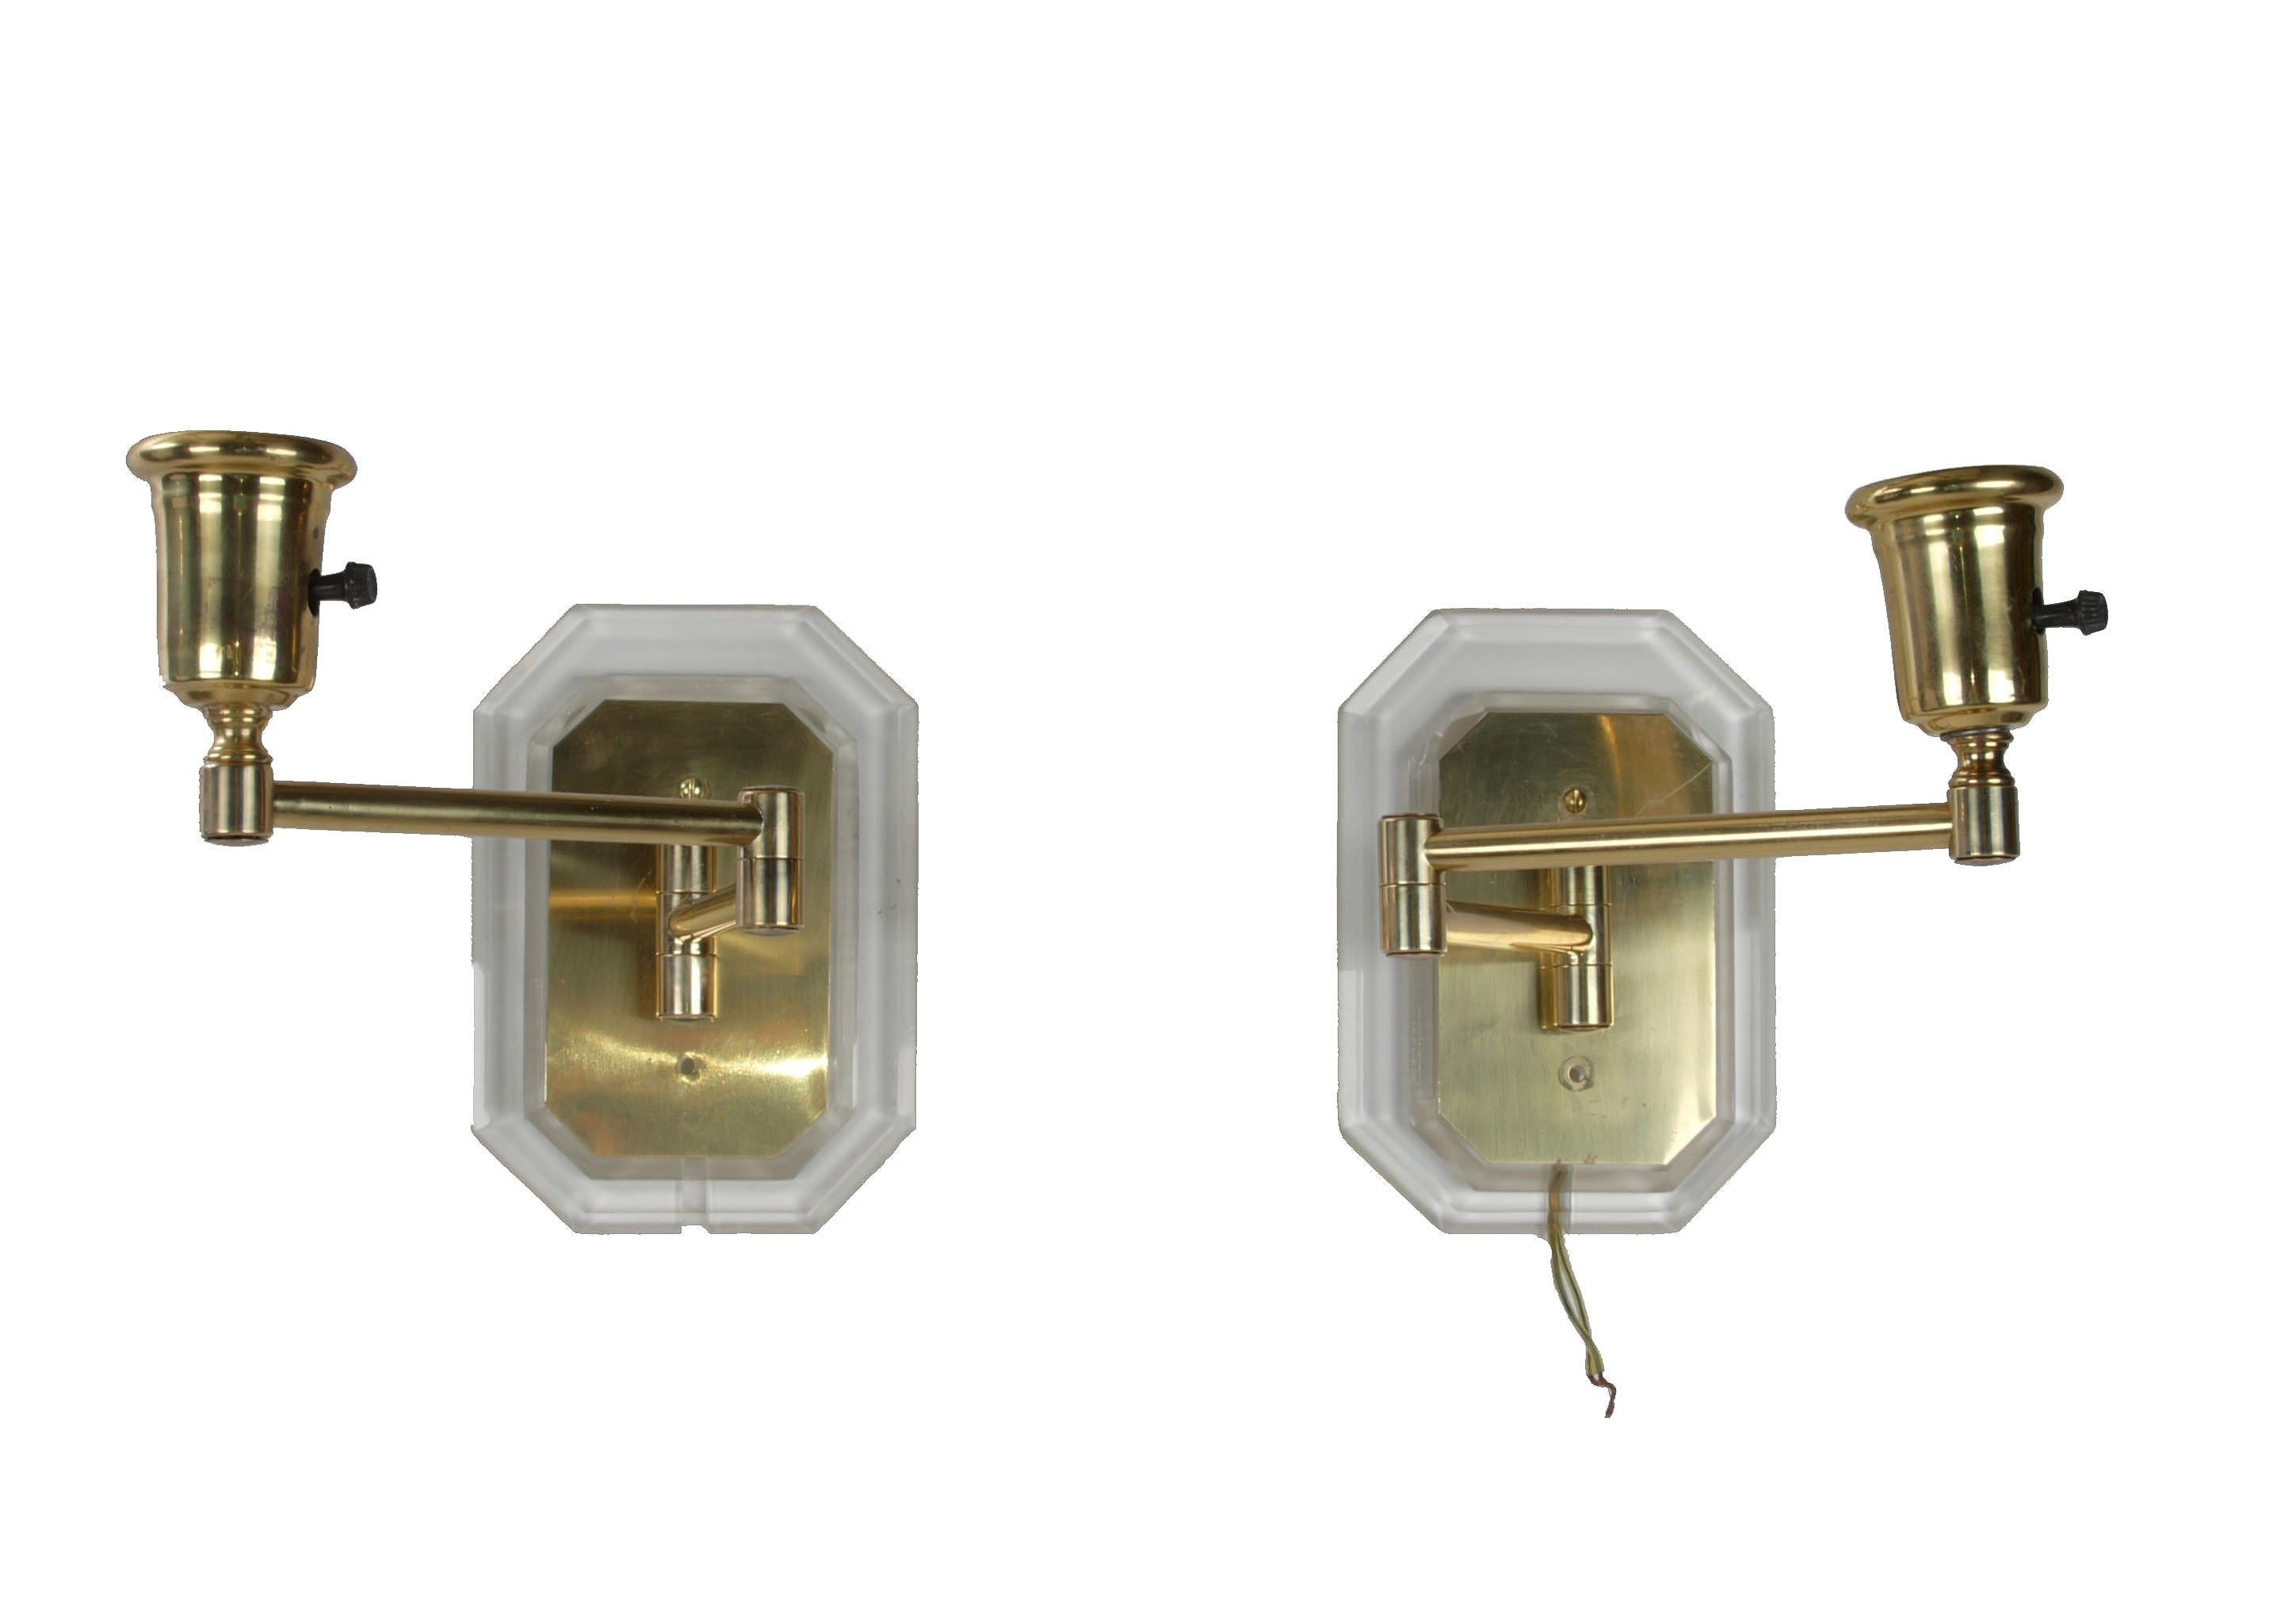 A pair of Mid-Century Modern Lucite and brass swing wall sconces in the style of Karl Springer. Wired for the U.S. and each uses a max. 60 wattage light bulb.
No shades.
Simply gorgeous.